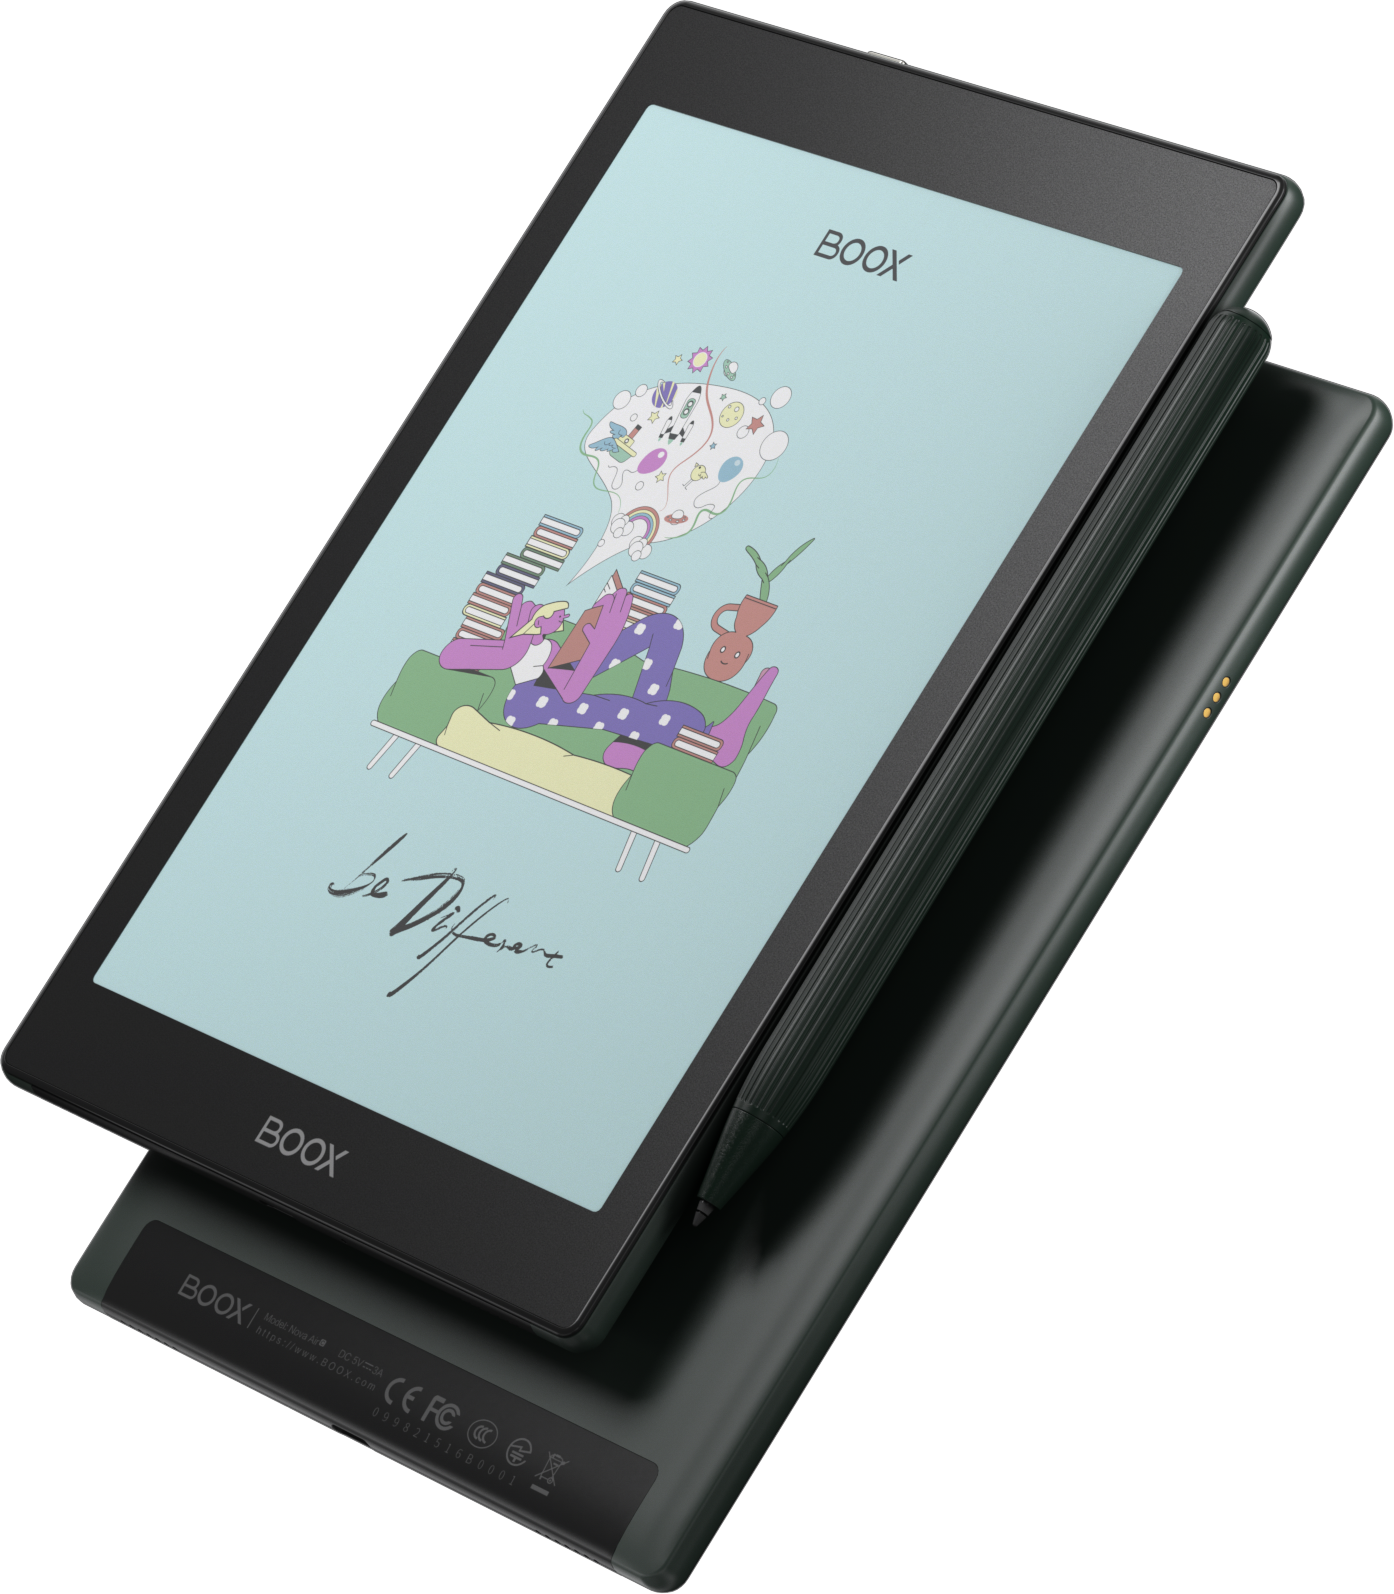 Onyx Boox Nova Air Color with free case and stylus